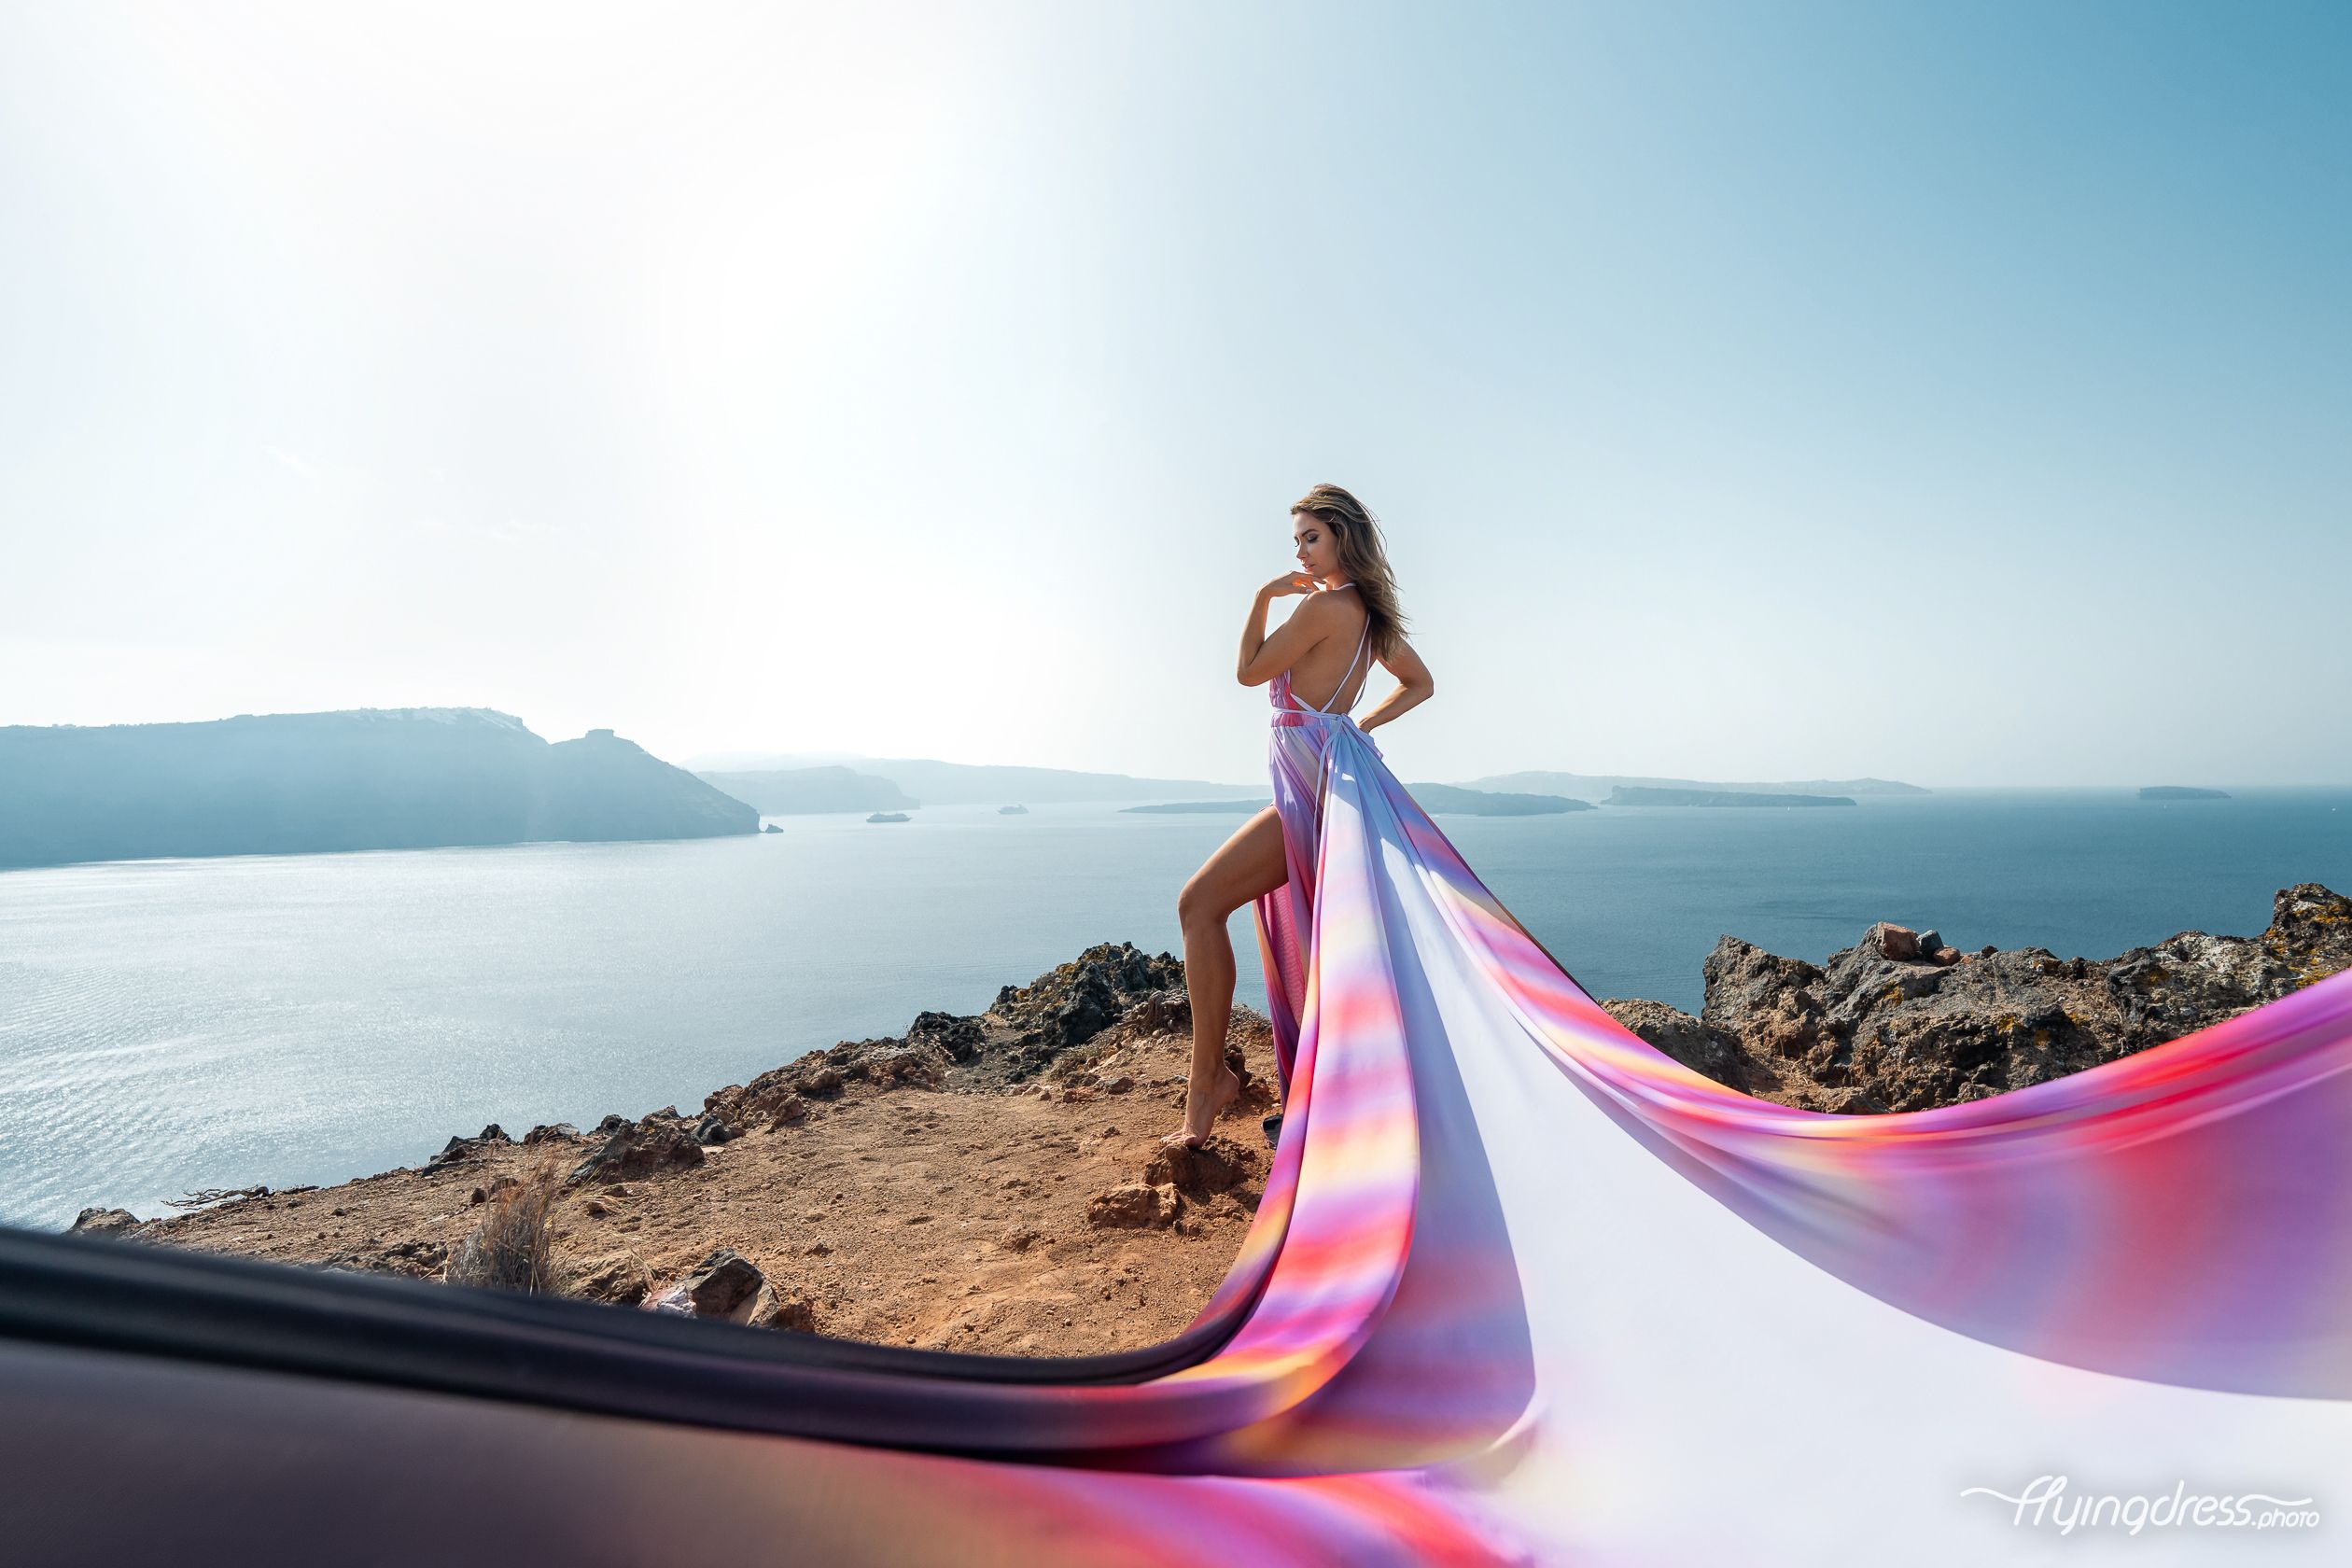 Multicolor ombre flying dress photoshoot with caldera view